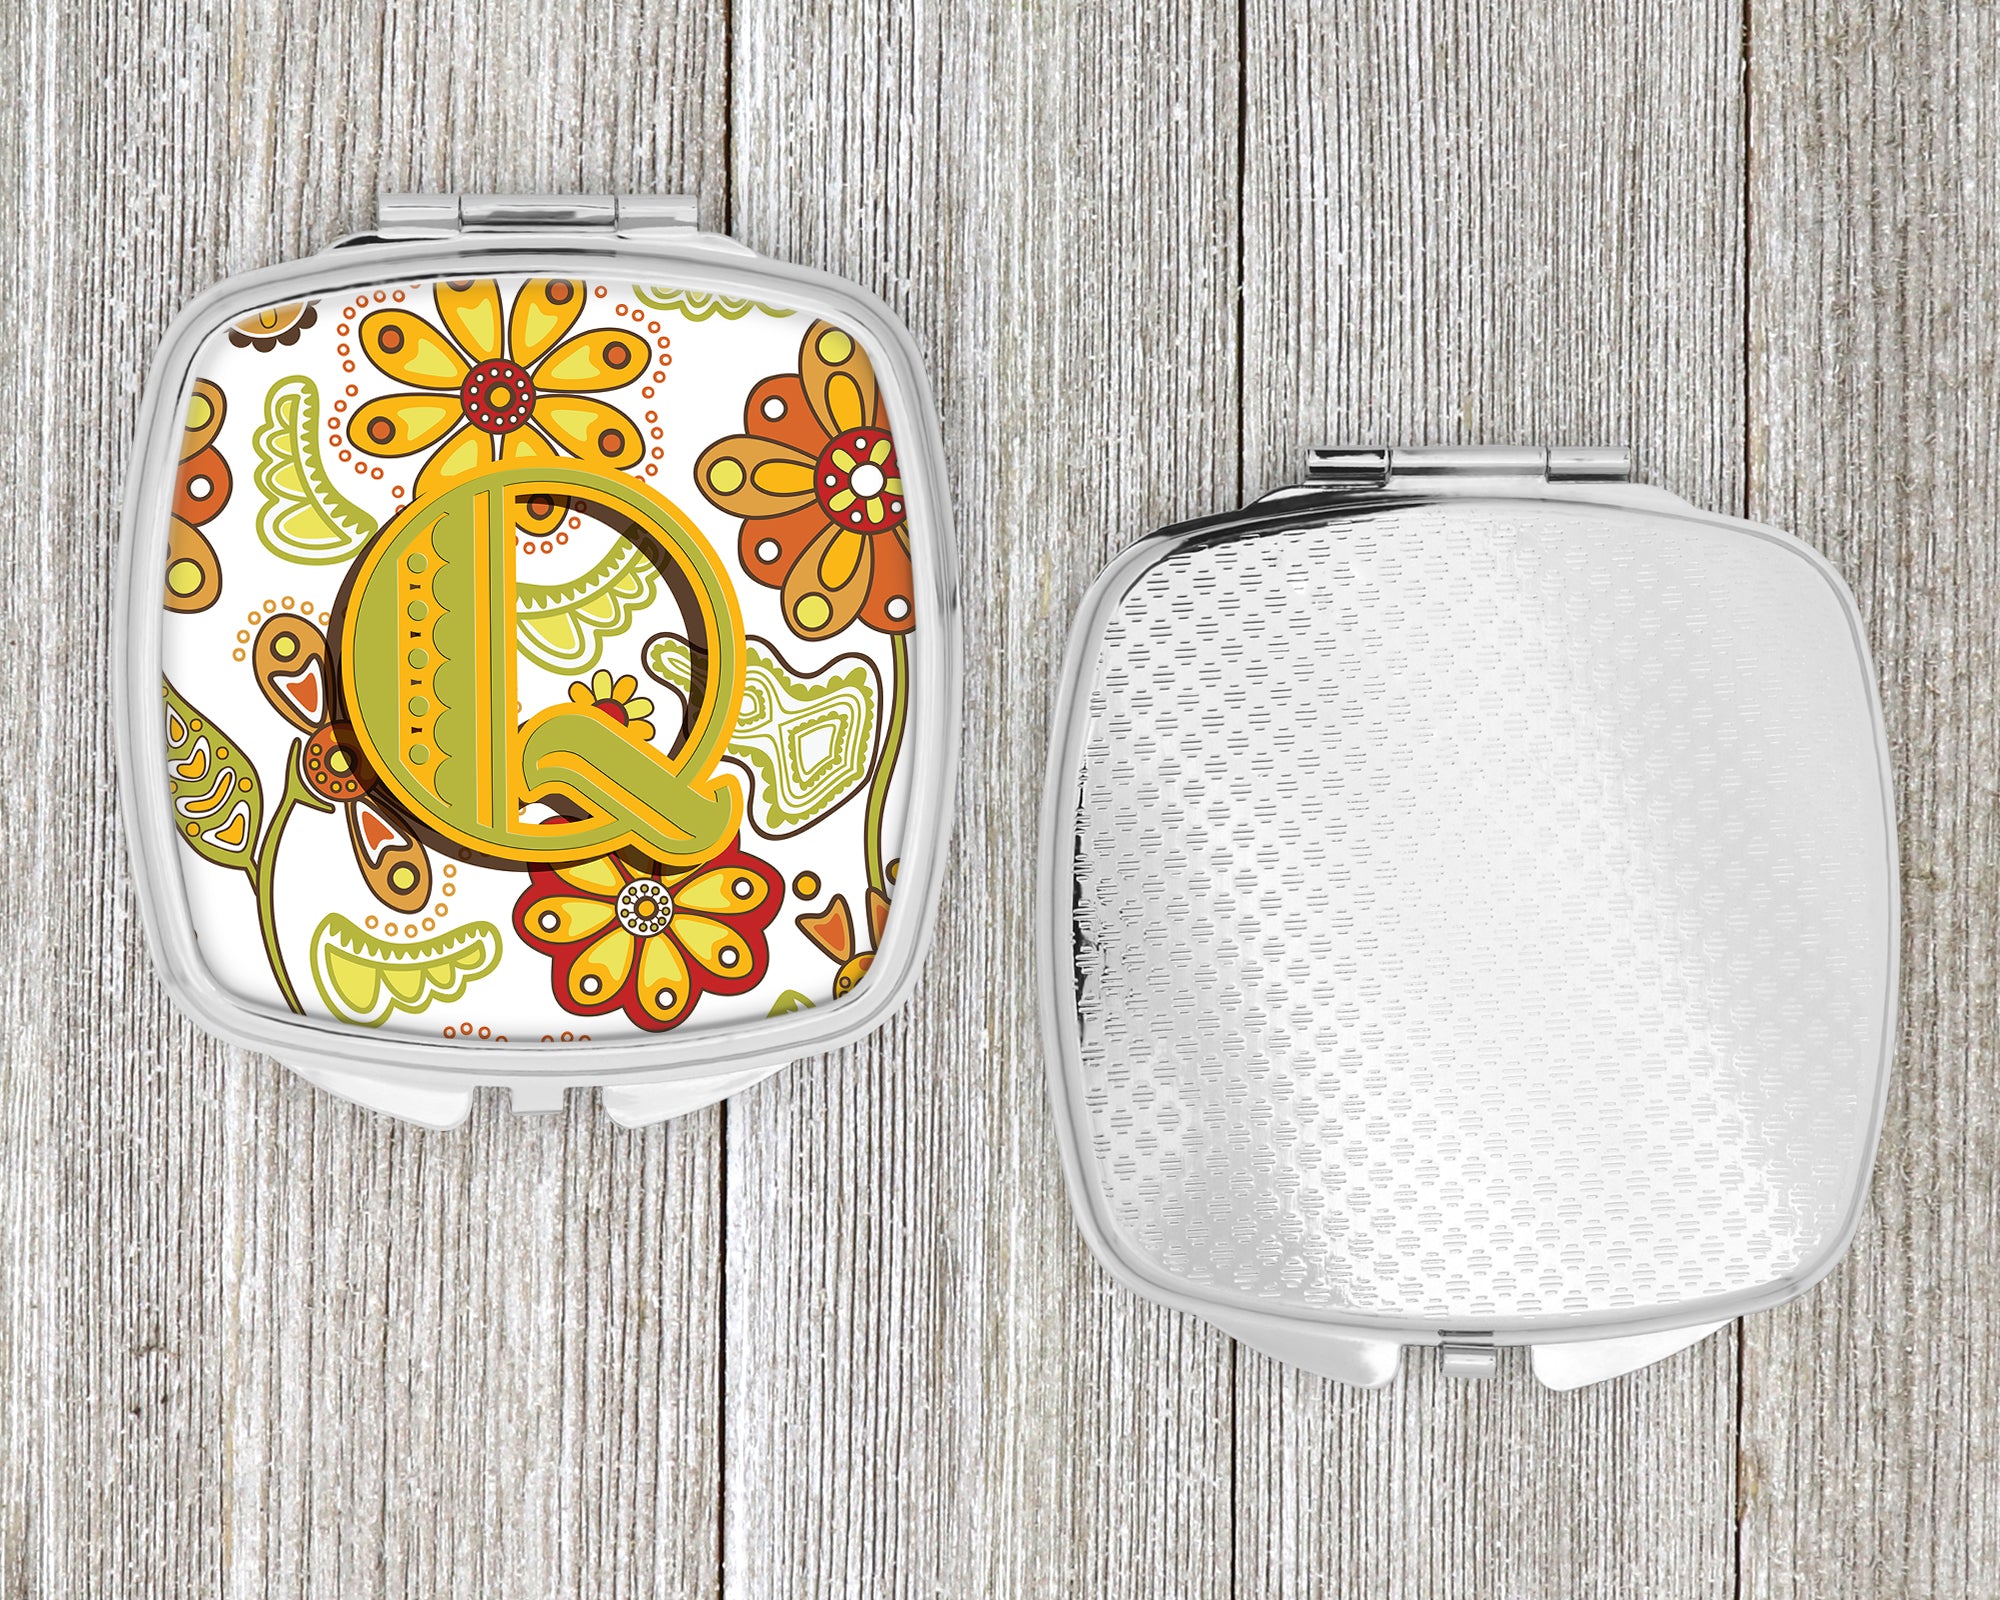 Letter Q Floral Mustard and Green Compact Mirror CJ2003-QSCM  the-store.com.